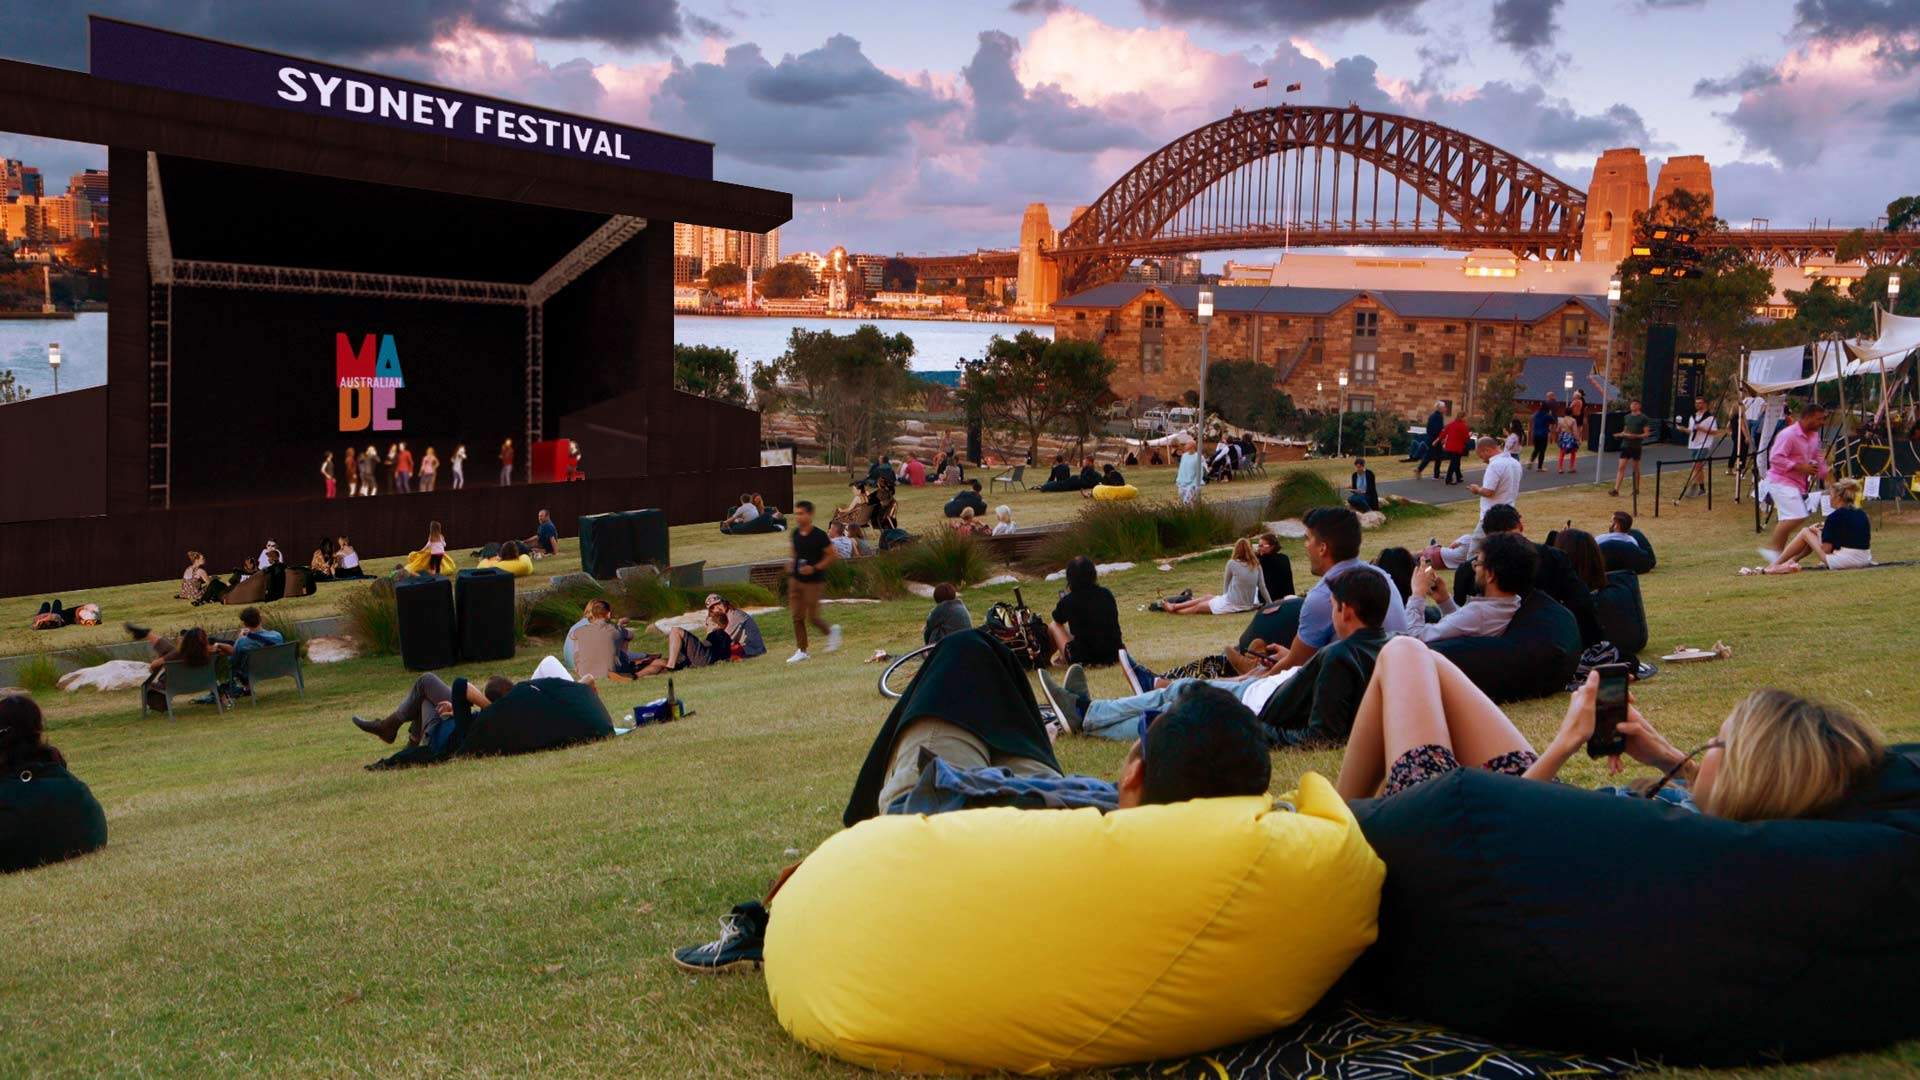 Sydney Festival Will Return This January with 130 Events Across the City